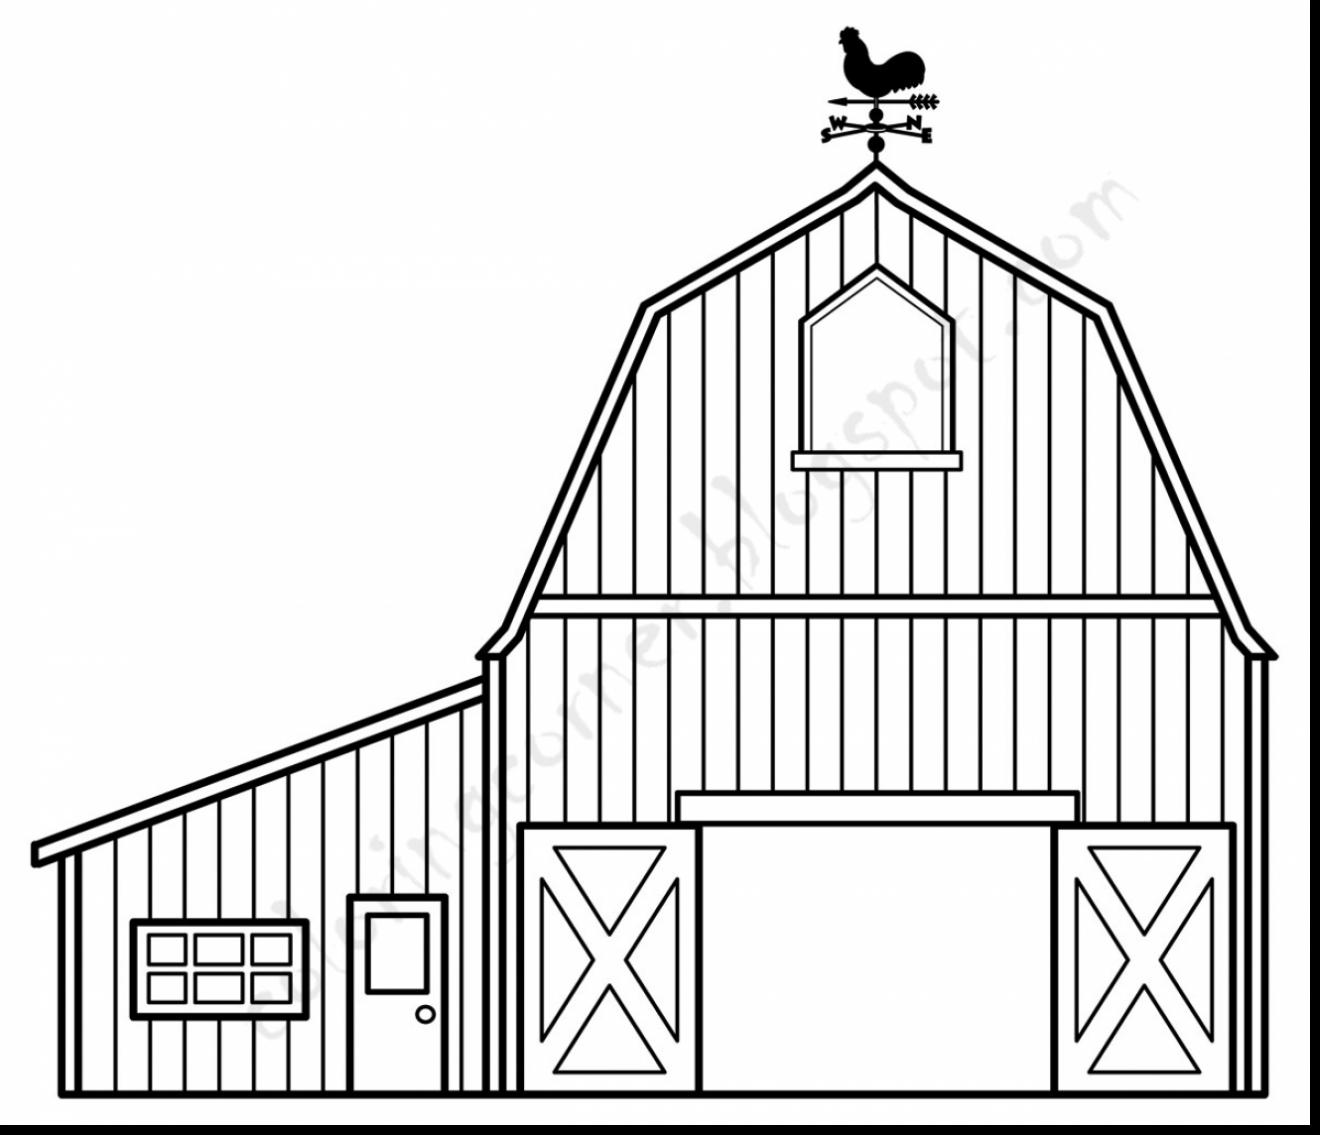 barn-outline-barn-coloring-pages-free-jpg-clipartix